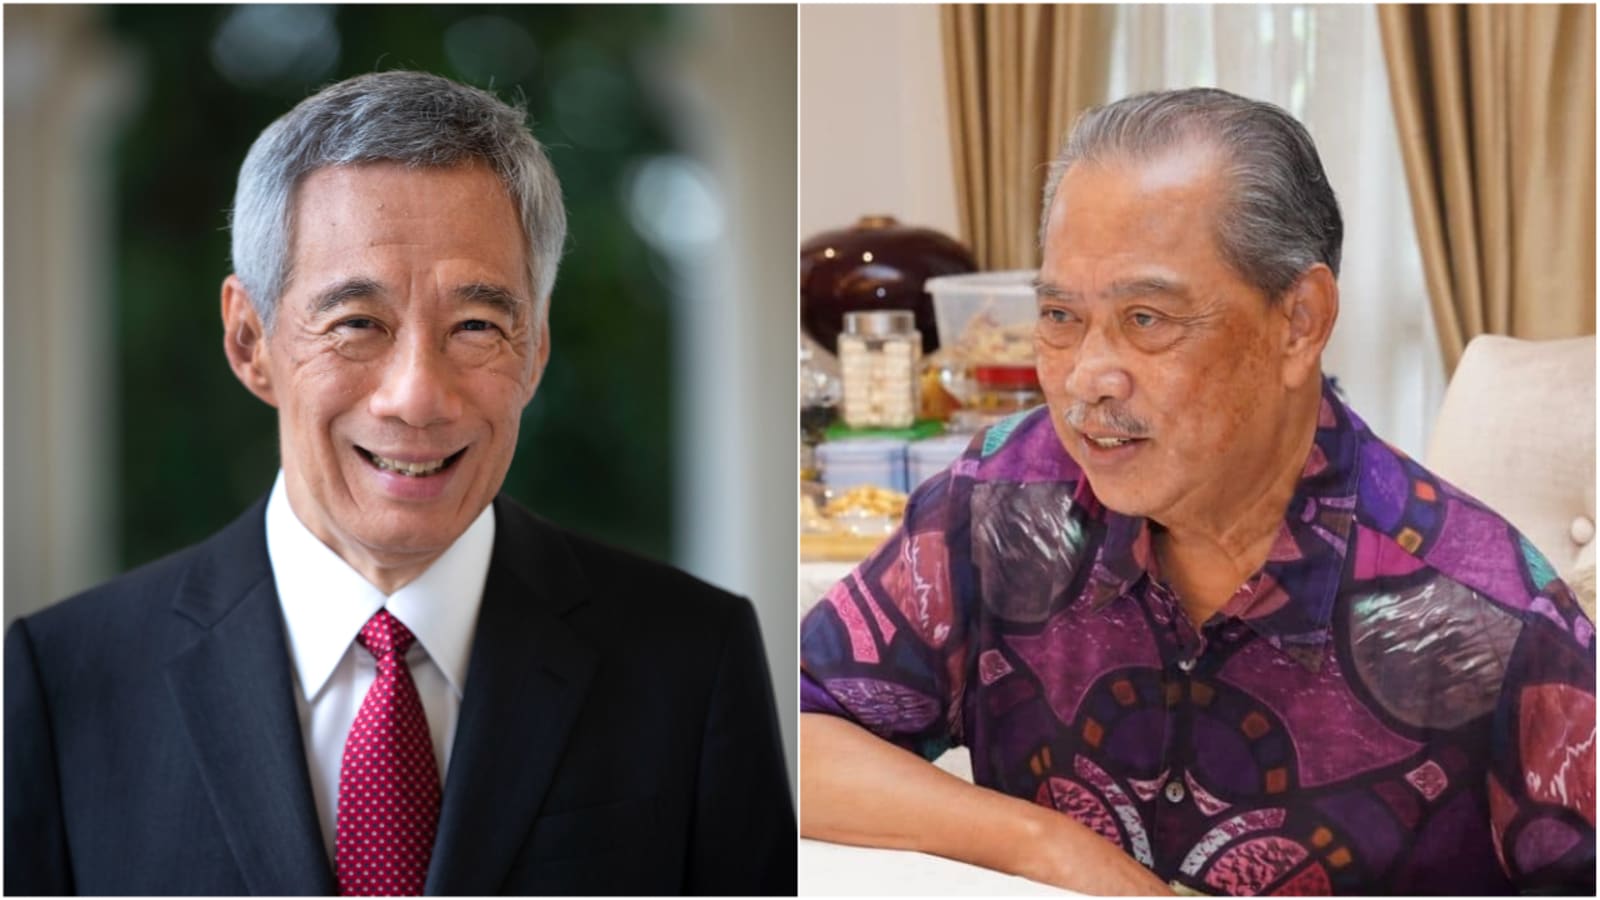 PM Lee, Malaysia’s former PM Muhyiddin speak of ‘strong cooperation’ between countries in phone call